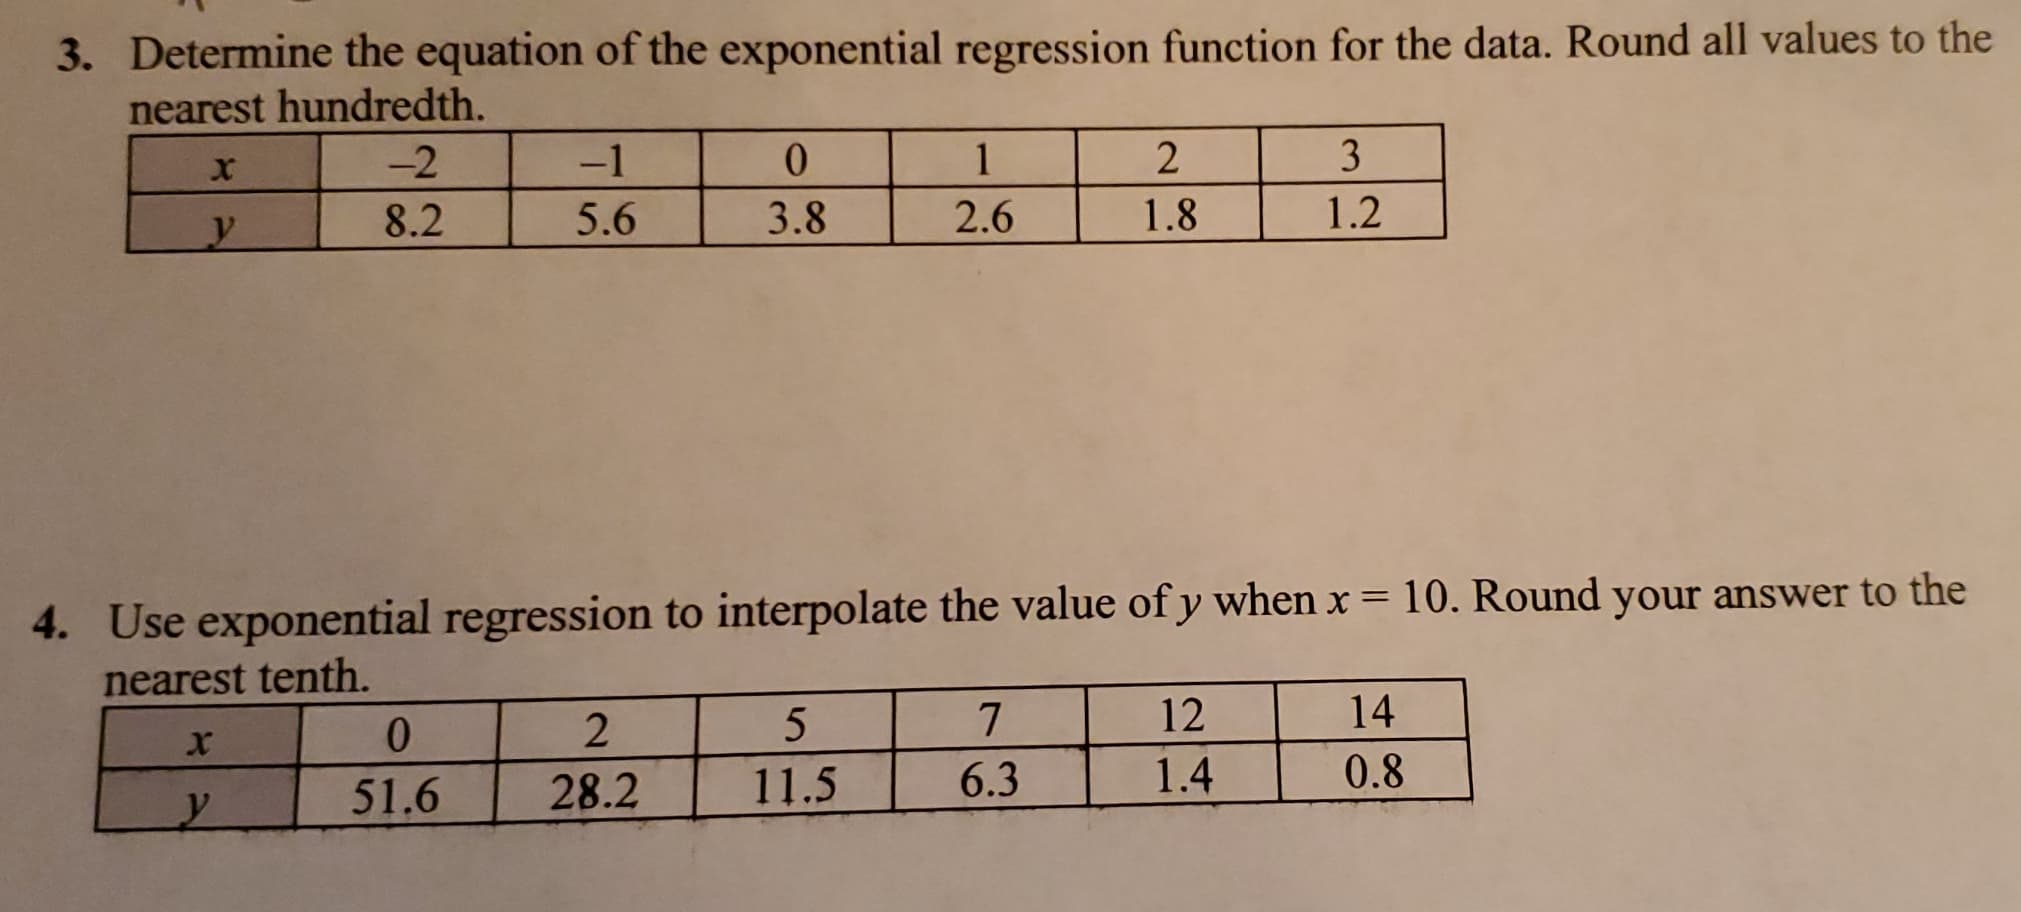 3. Determine the equation of the exponential regression function for the data. Round all values to the
nearest hundredth.
-2
-1
0.
1
3
8.2
5.6
3.8
2.6
1.8
1.2
4. Use exponential regression to interpolate the value of y when x = 10. Round your answer to the
nearest tenth.
7
12
14
51.6
28.2
11.5
6.3
1.4
0.8
